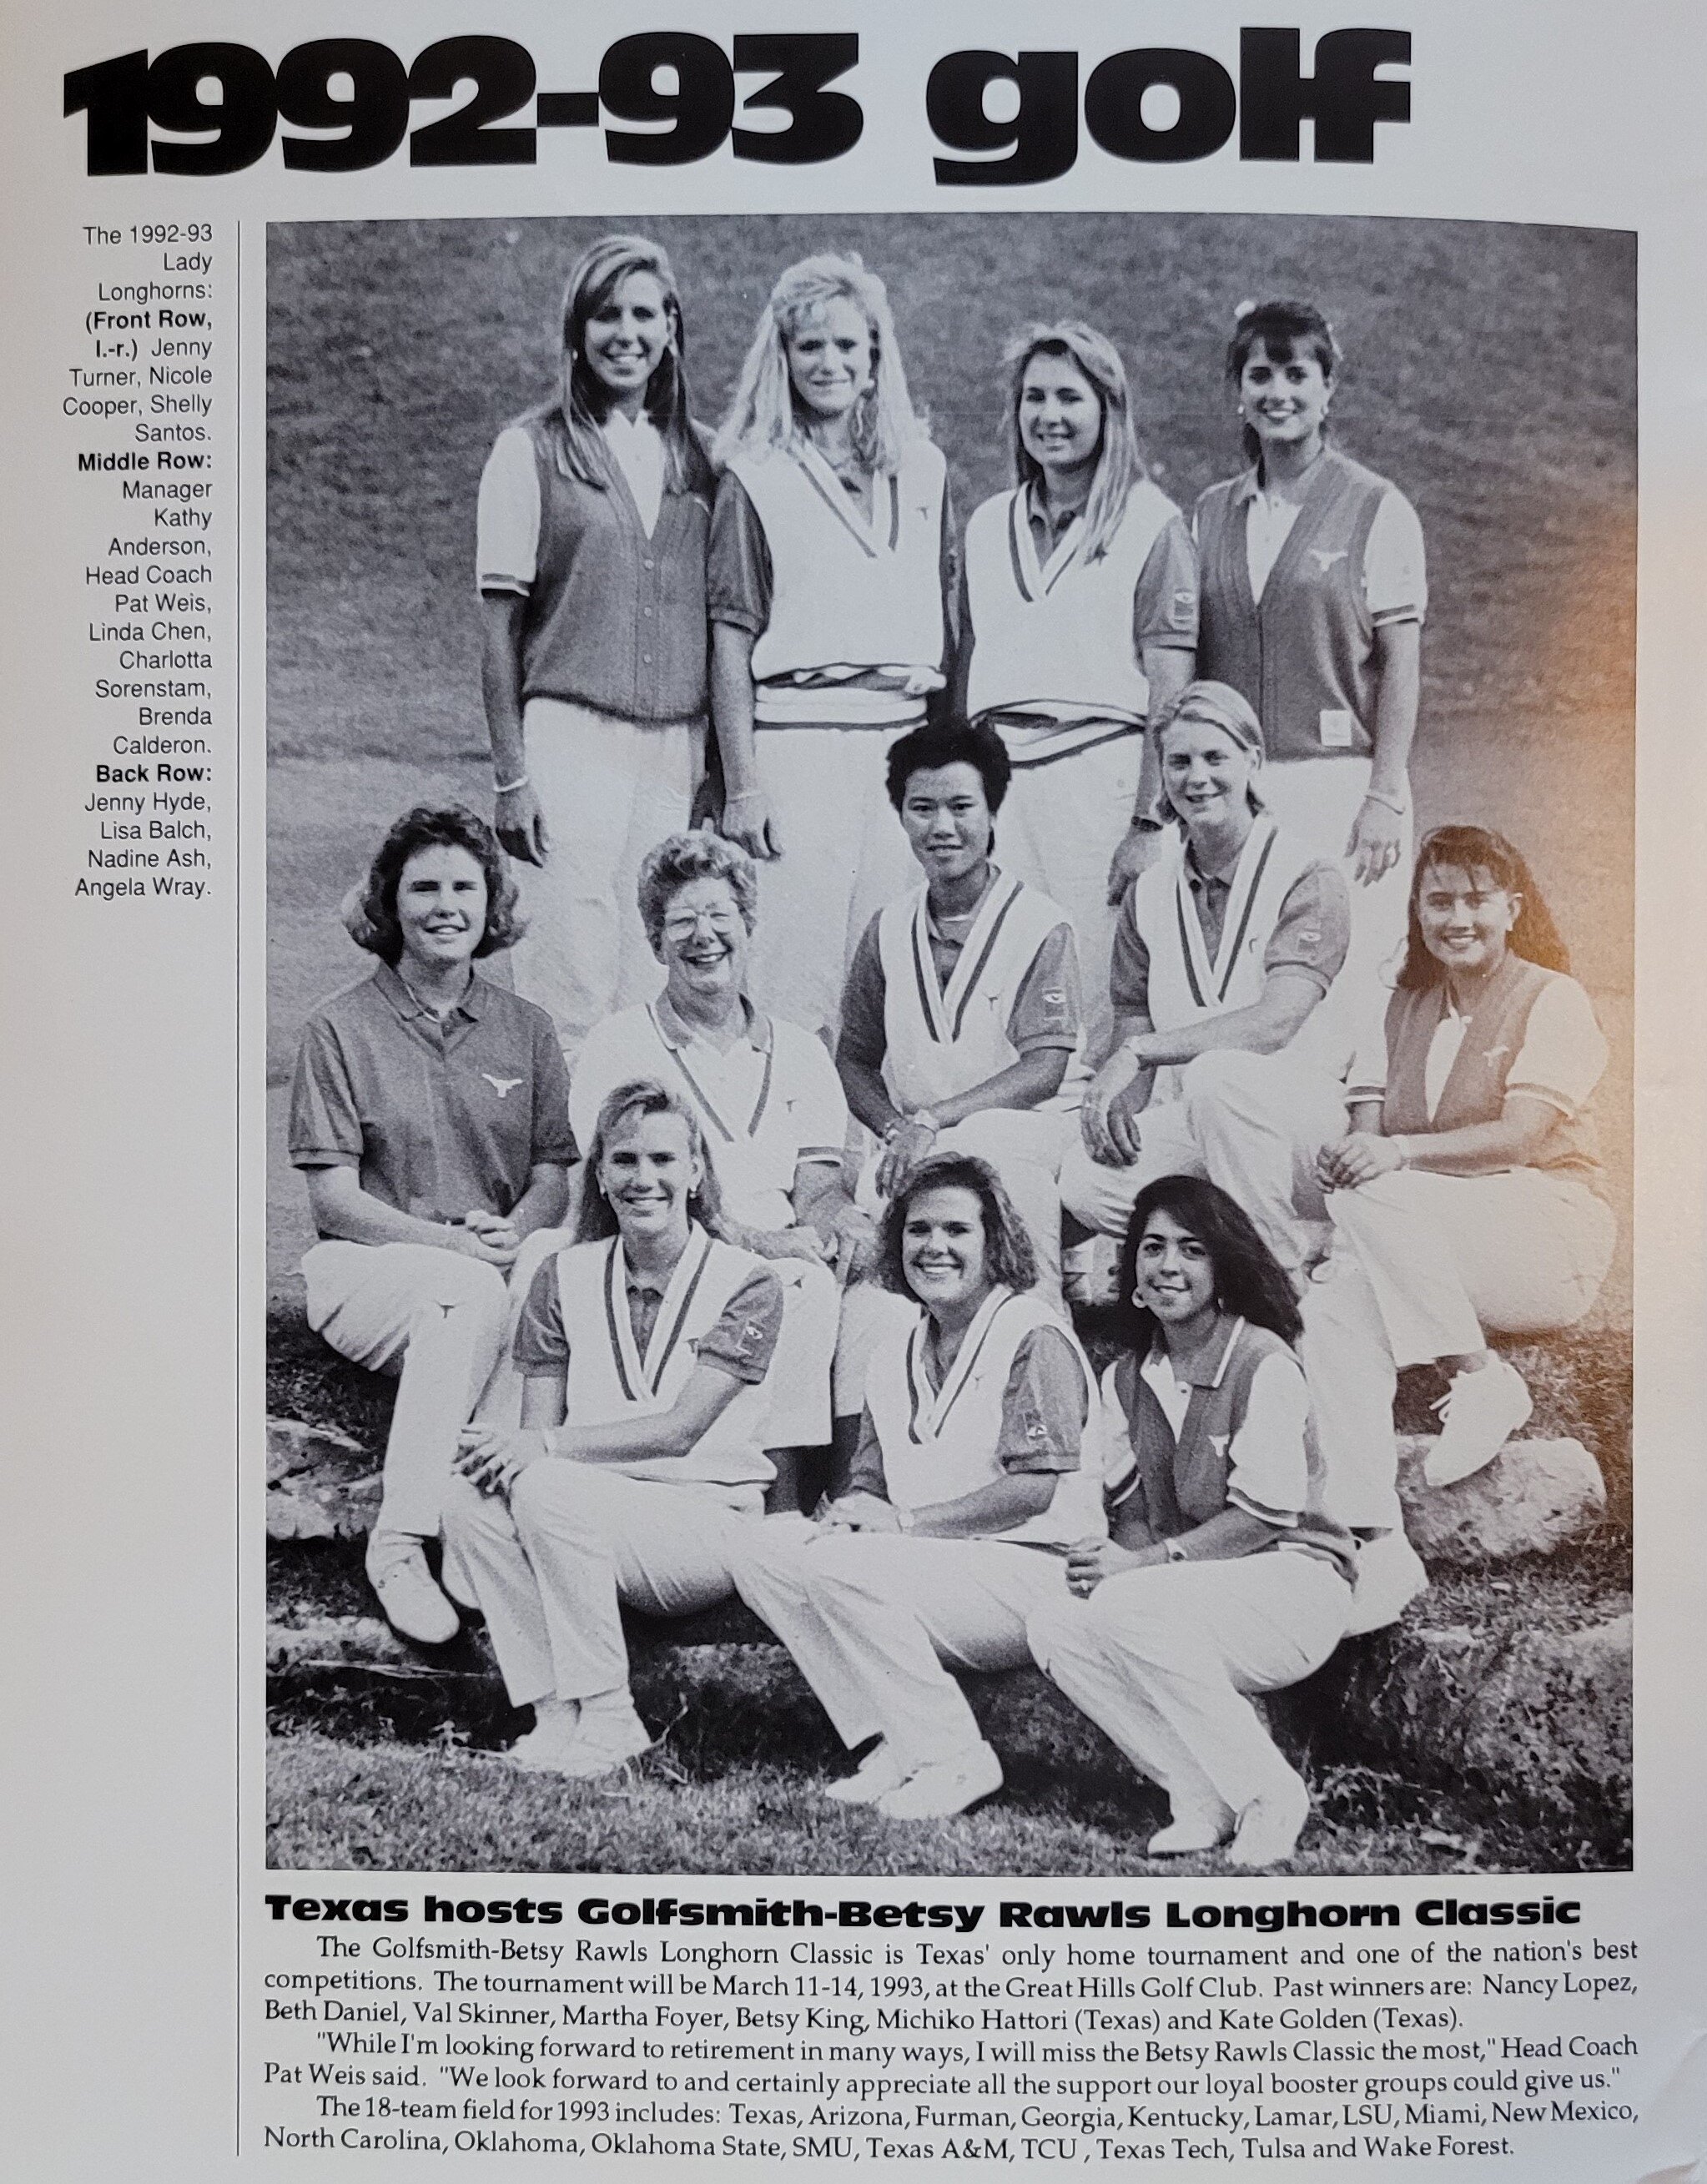  Front - Turner, Cooper, Santos, Middle Manager Kathy Anderson, Weis, Chen, Sorenstam, Calderon, , Back Hyde, Balch, Ash, Wray 